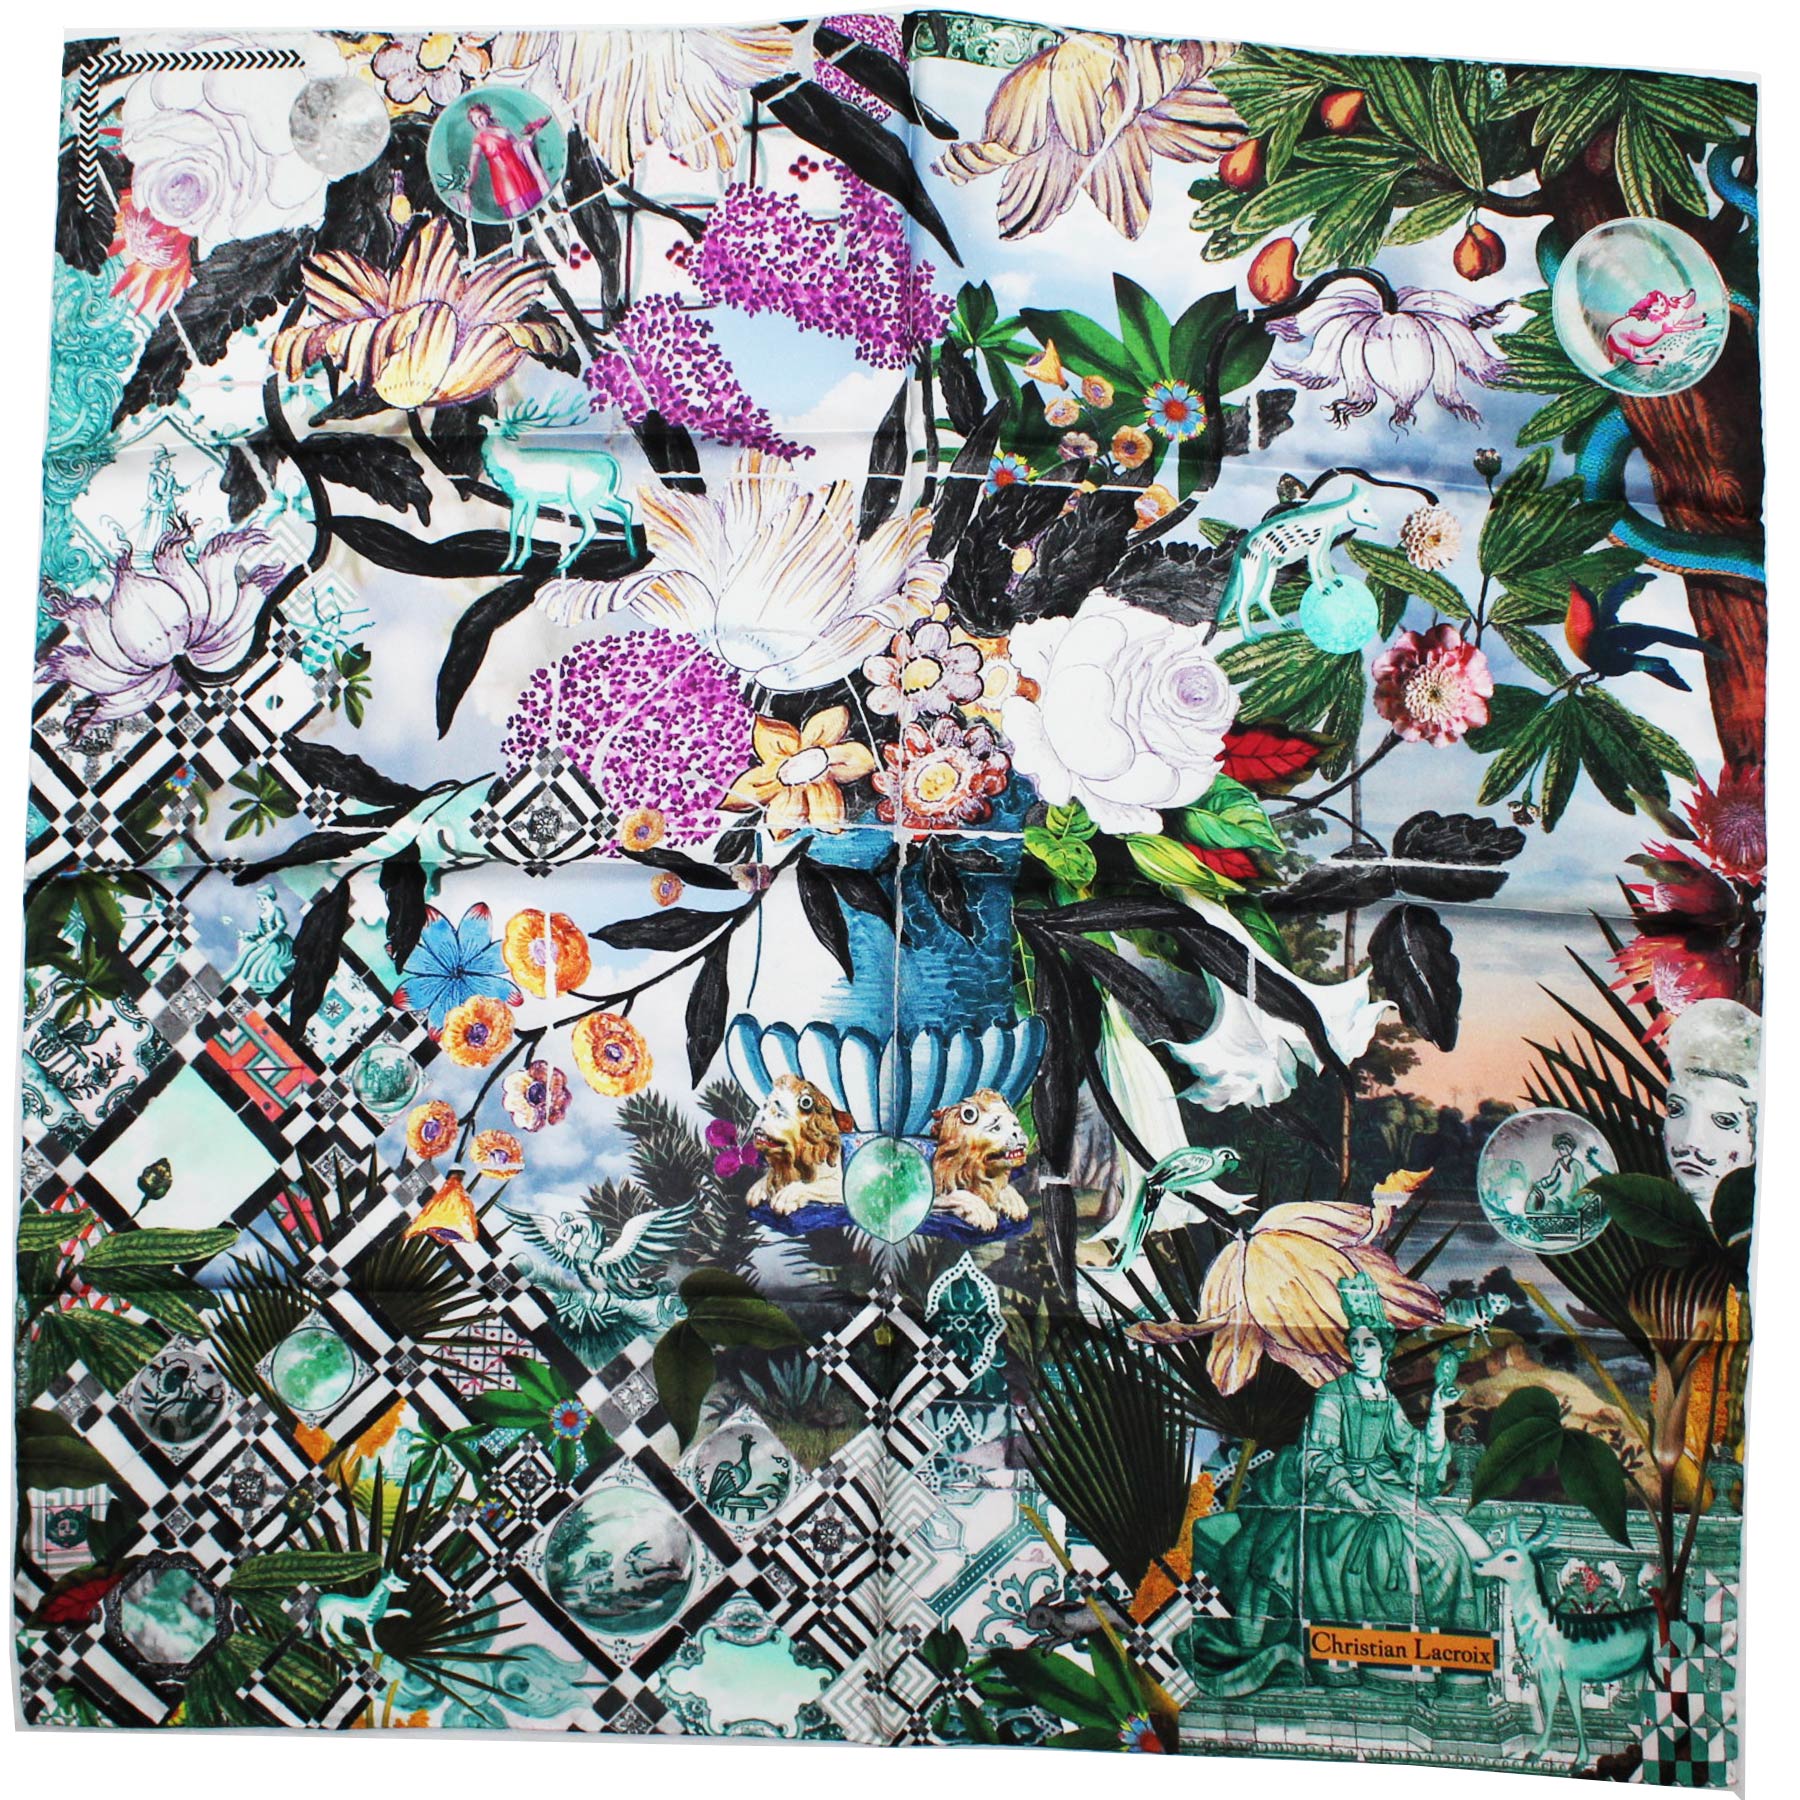 Christian Lacroix Scarf Aqua Green Brown Novelty - Large 36 Inch Square Twill Silk Scarf